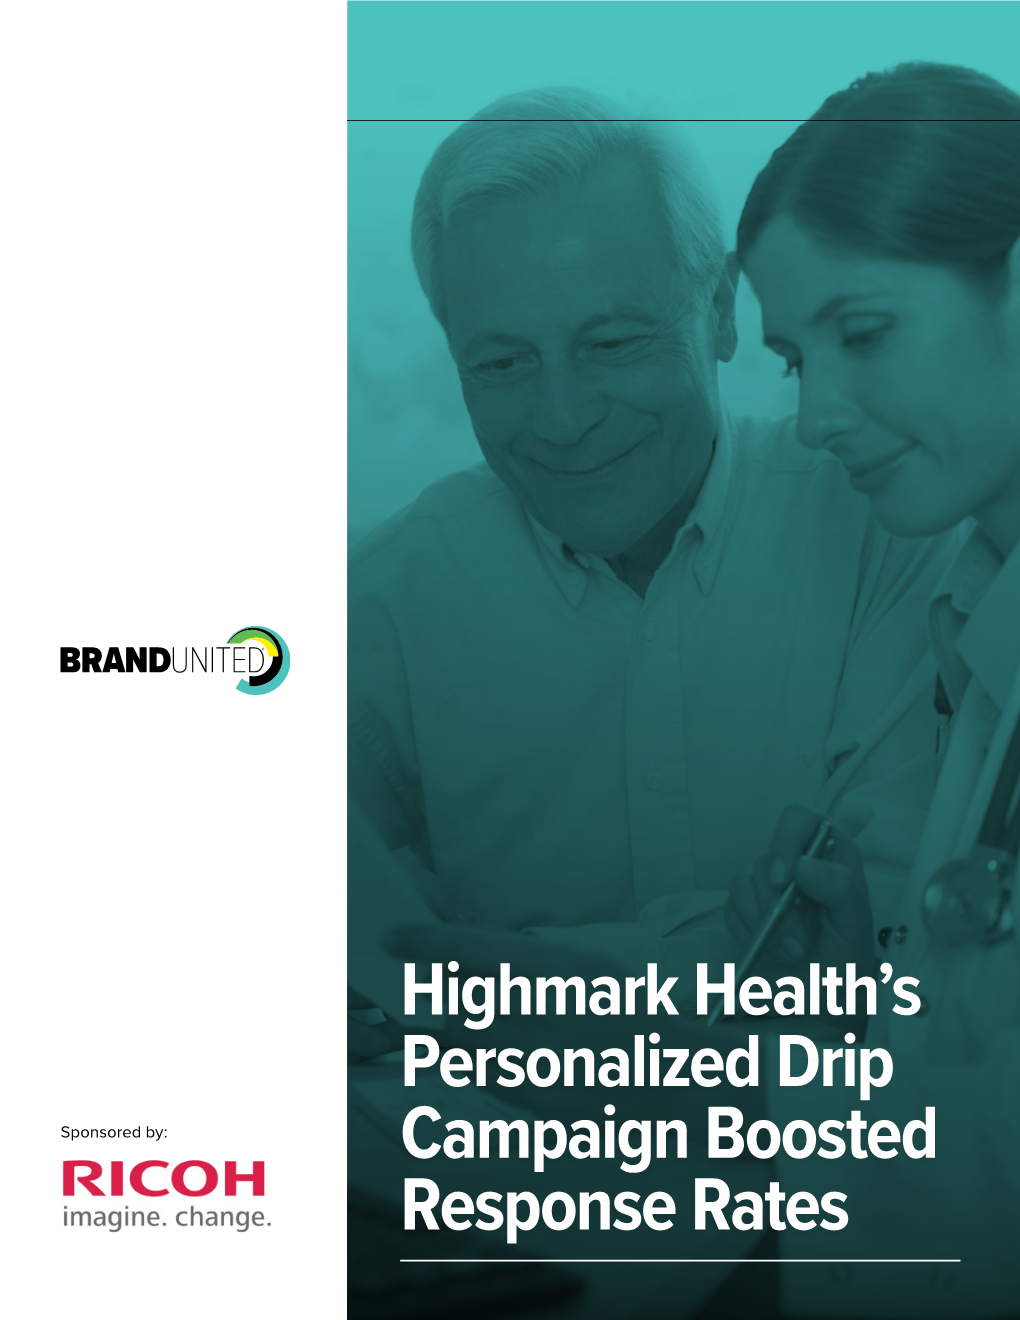 Highmark Health's Personalized Drip Campaign Boosted Response Rates